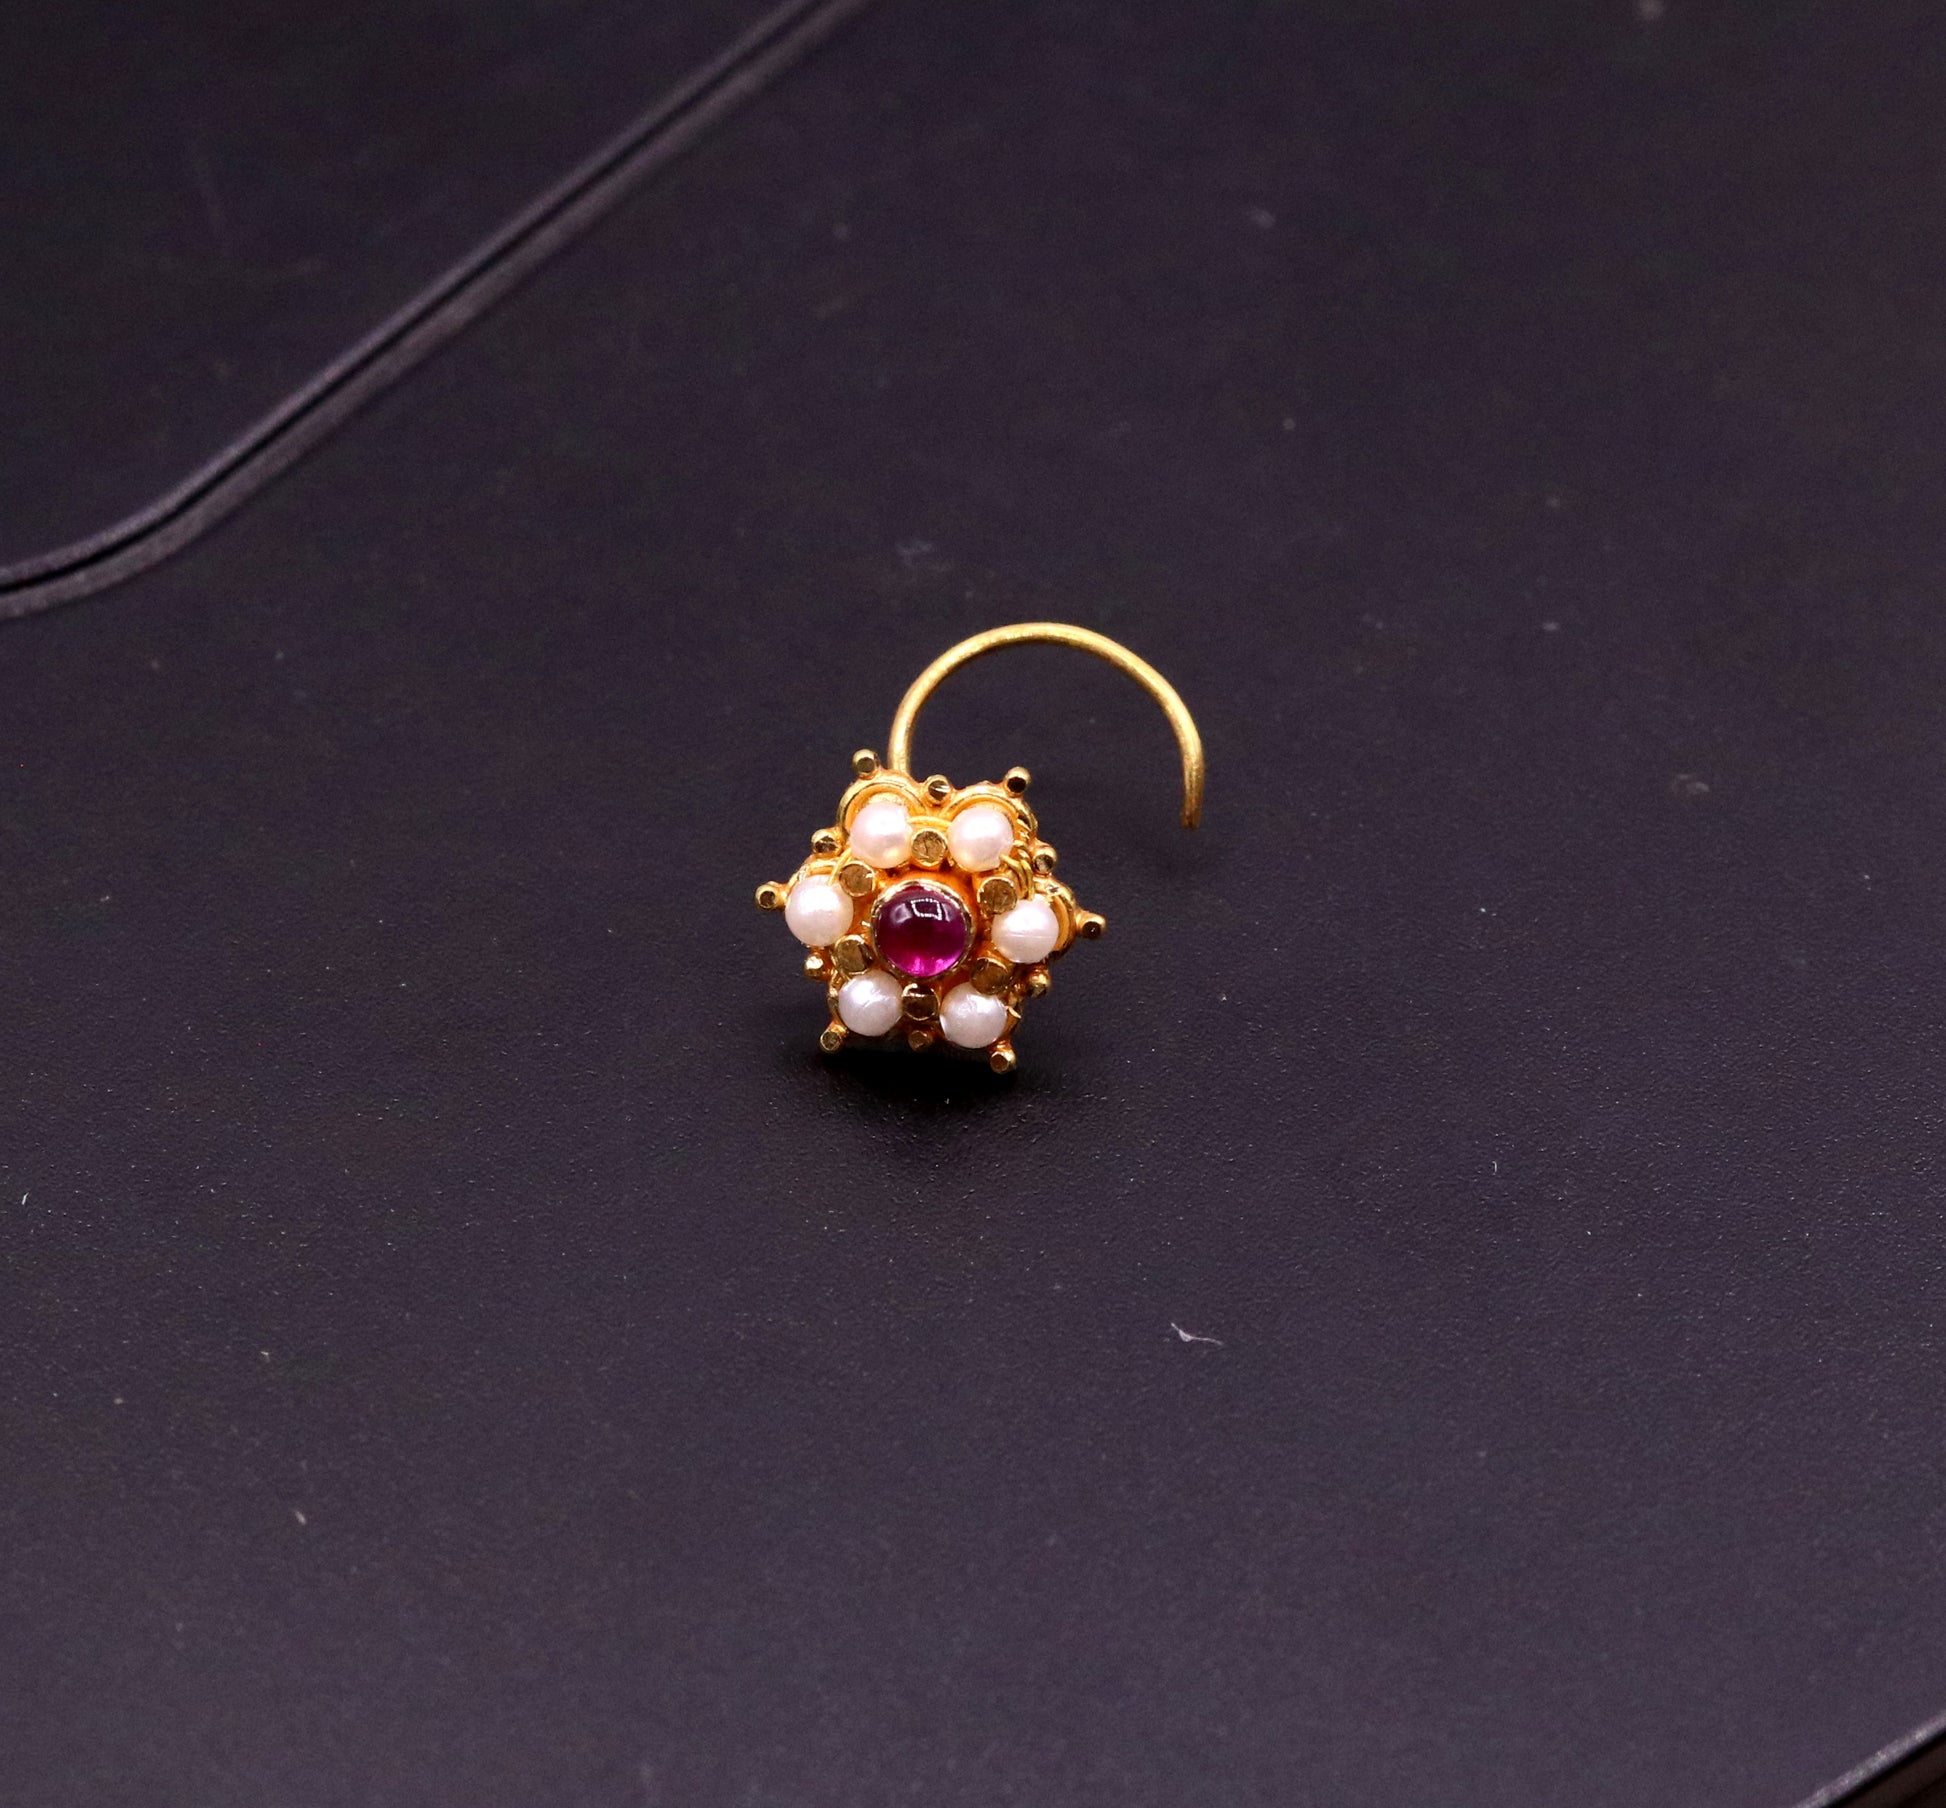 6mm white pearl and red stone fabulous 20kt yellow gold nose pin nose stud Indian vintage antique design handmade tribal jewelry gnp25 - TRIBAL ORNAMENTS